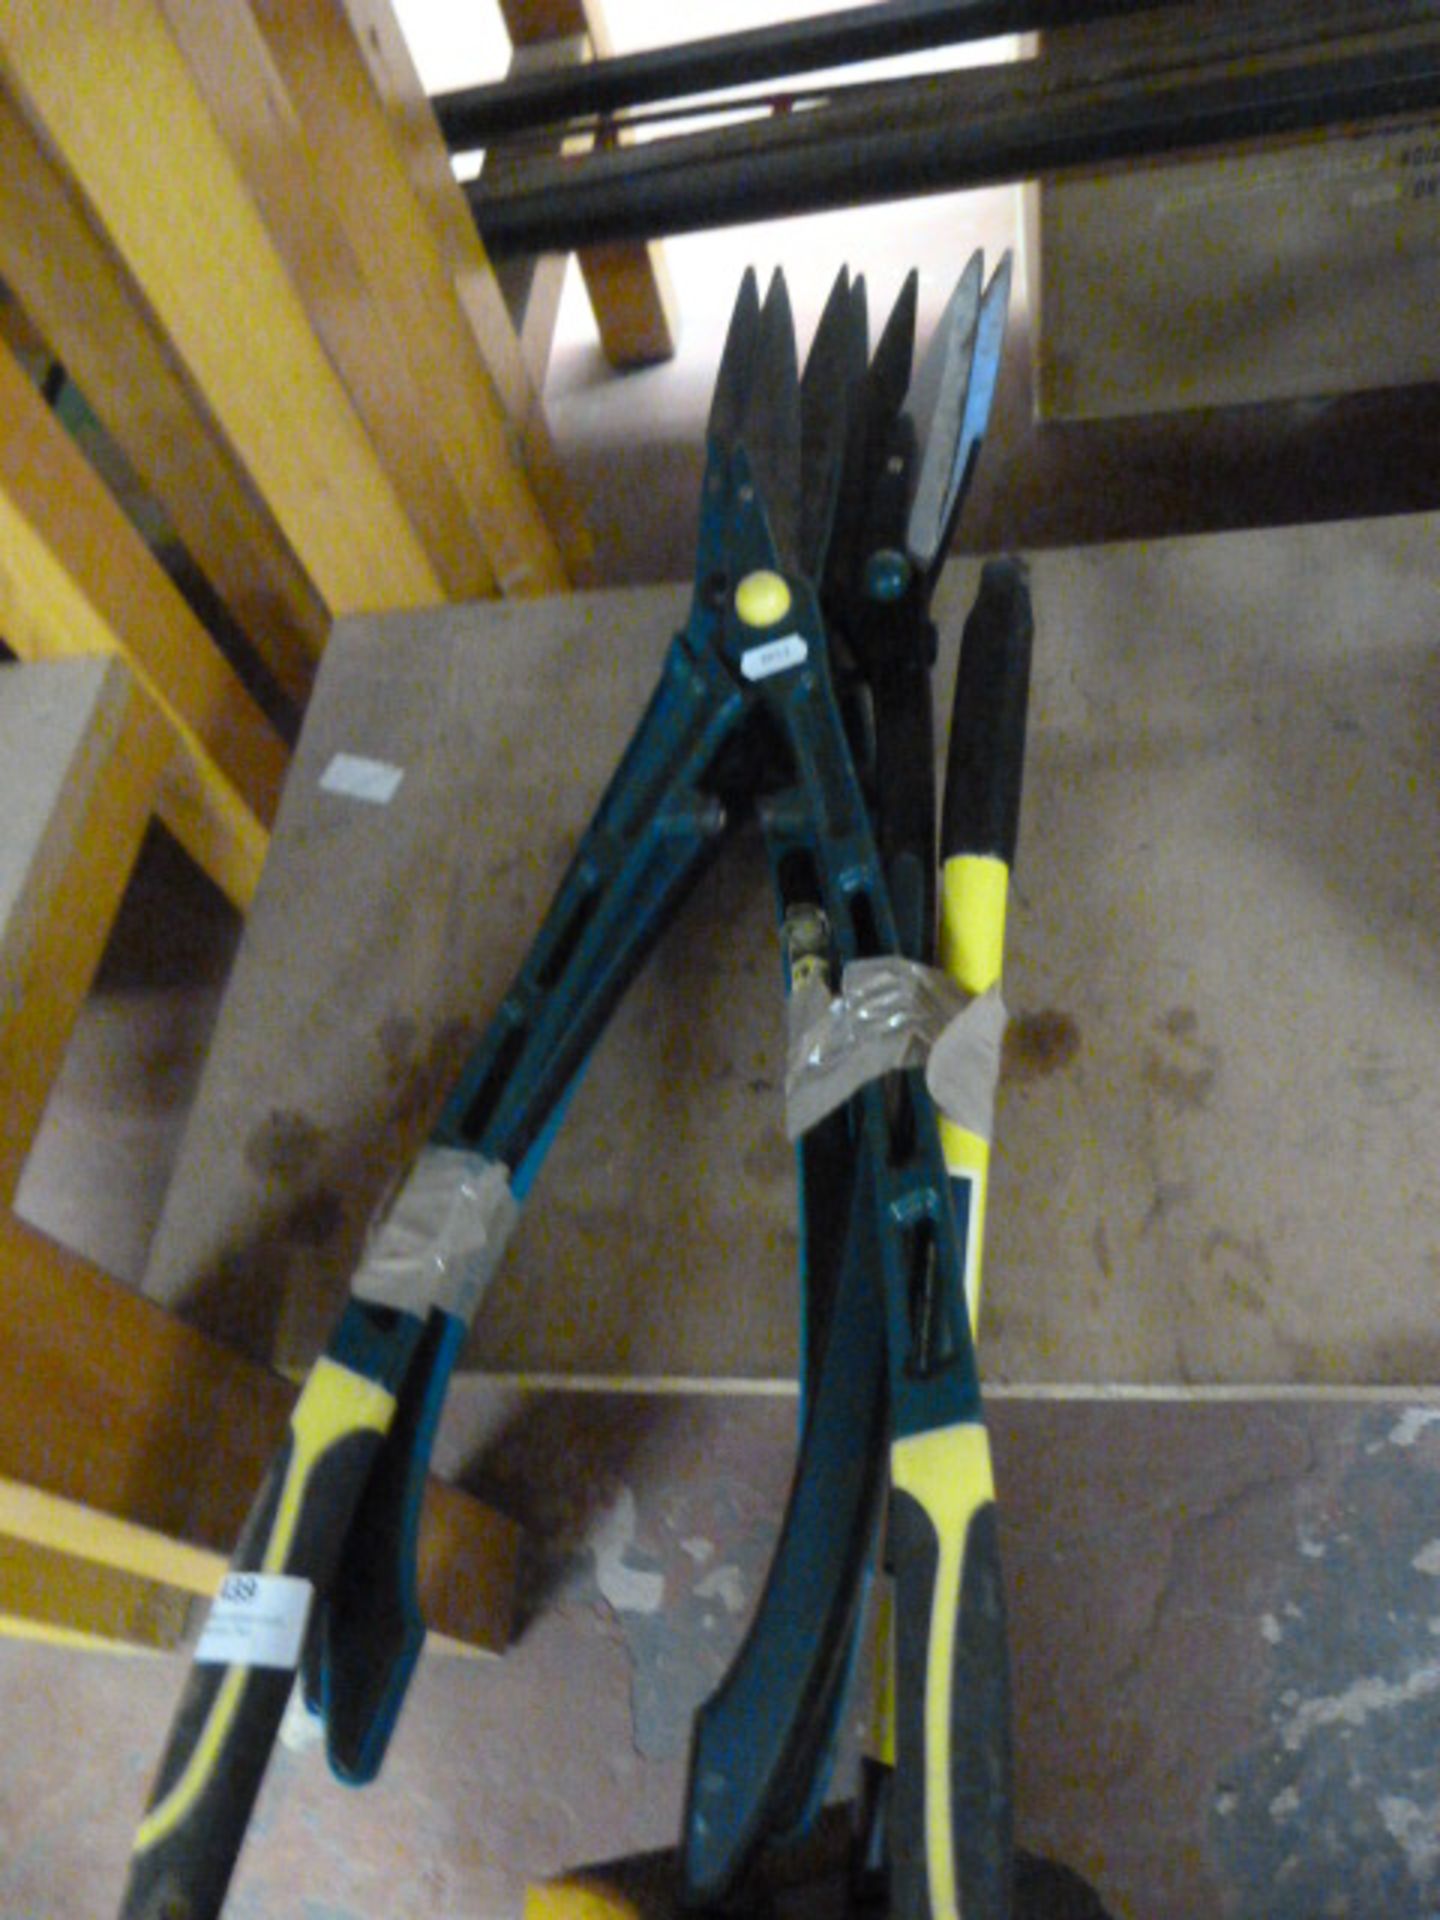 Four Pairs of Garden Shears and a Window Cleaner